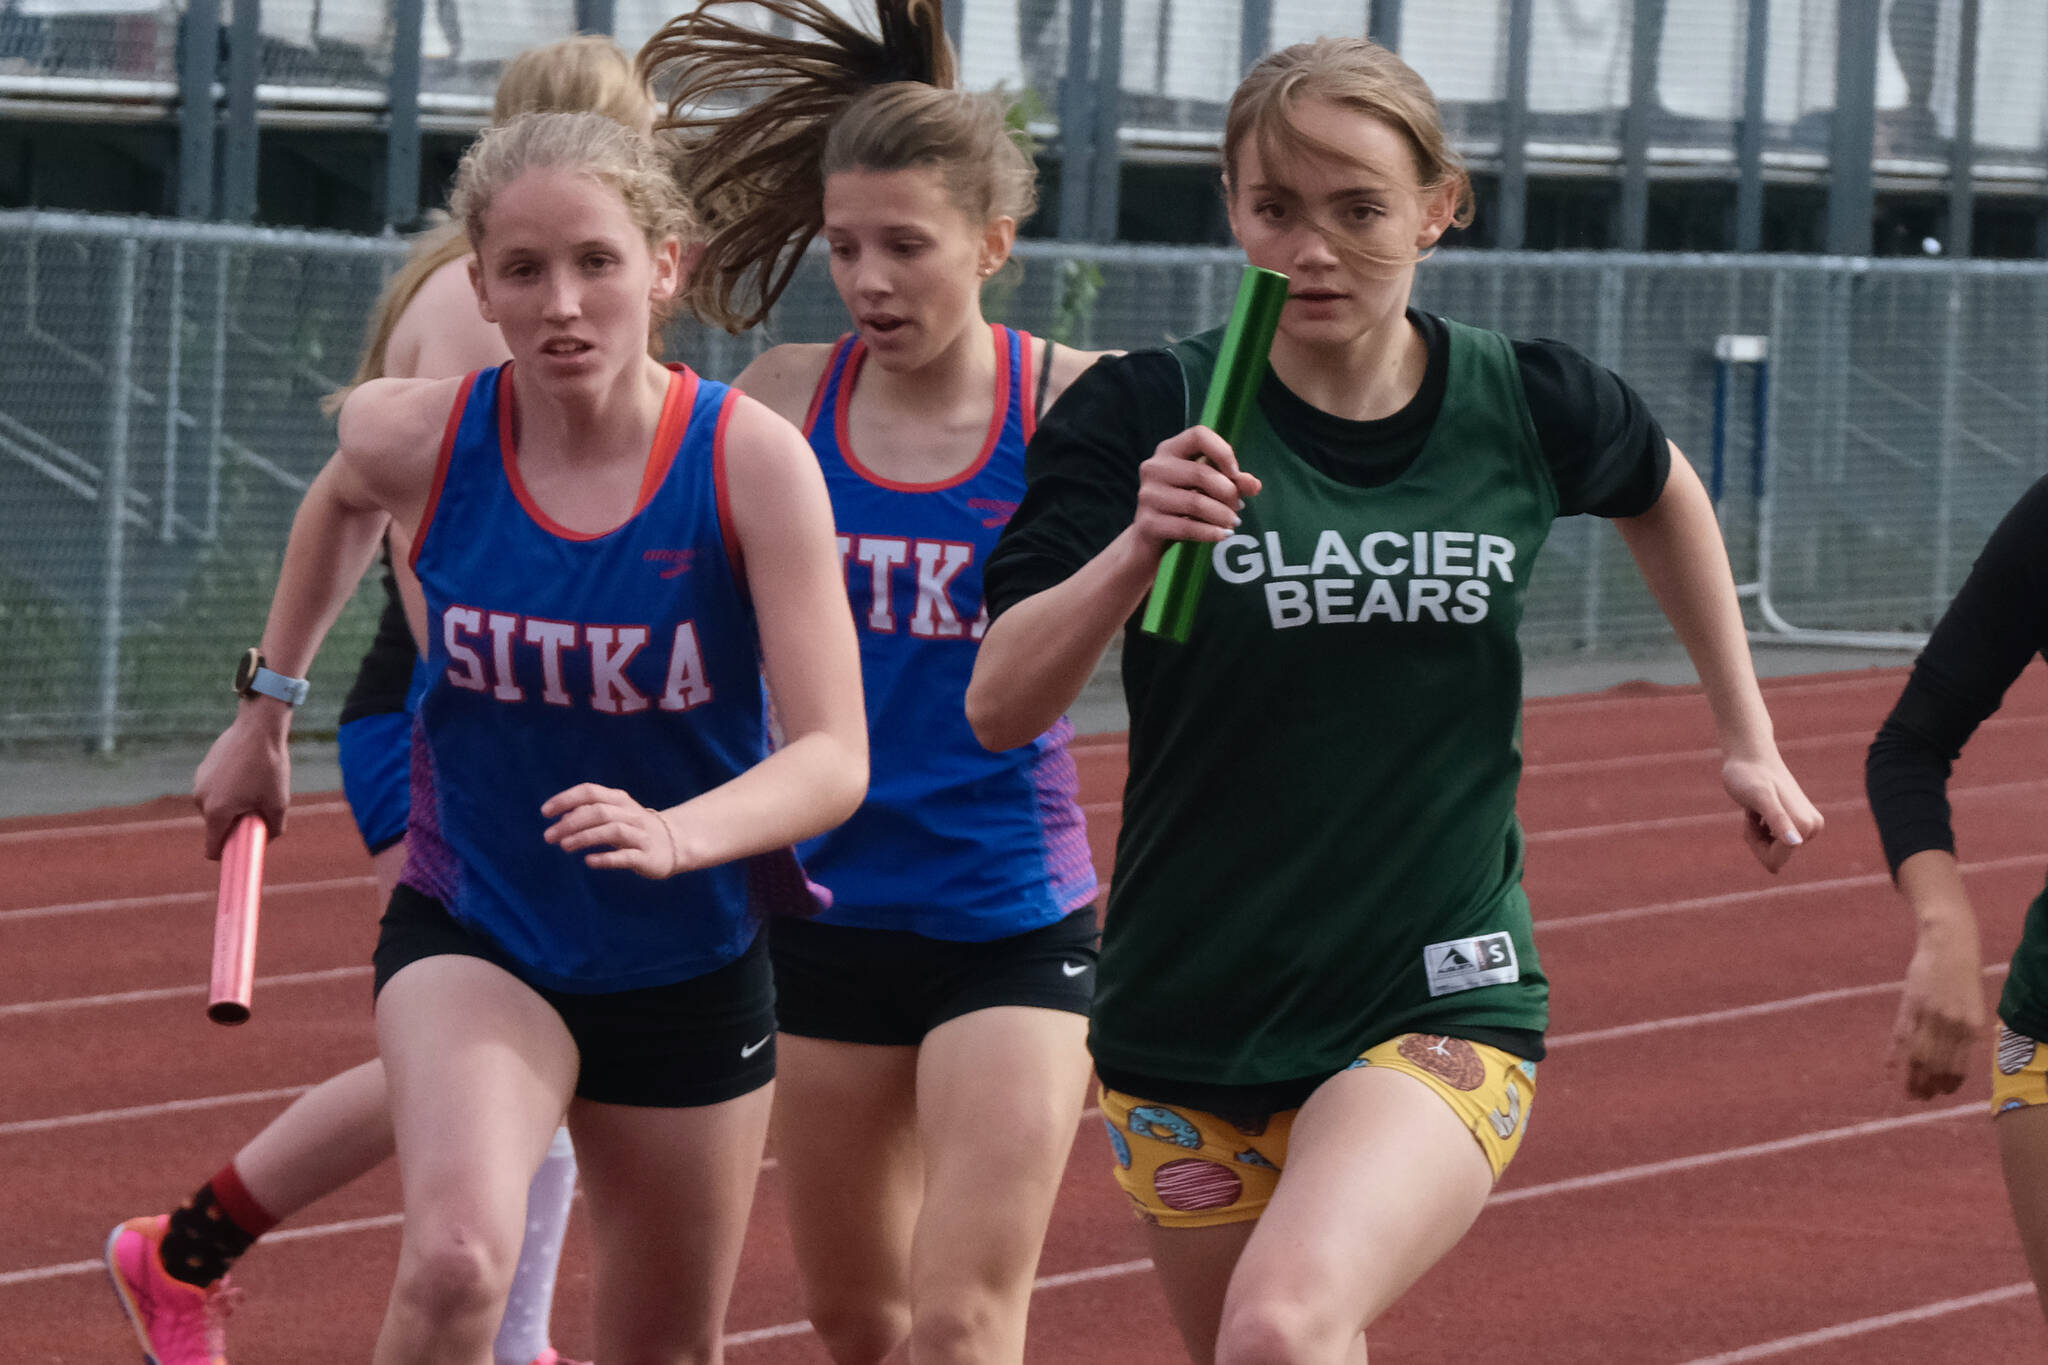 Sitka sophomore Clare Mullin and Haines senior Avari Getchell start the anchor leg of the Division II girls 4x400 relay after taking baton passes from Sitka freshman Natalie Hall and Haines sophomore Ari’el Godinez Long during the Region V Track & Field Championships. Sitka performed well at the state championship this weekend, earning a Division II title. (Klas Stolpe / Juneau Empire)